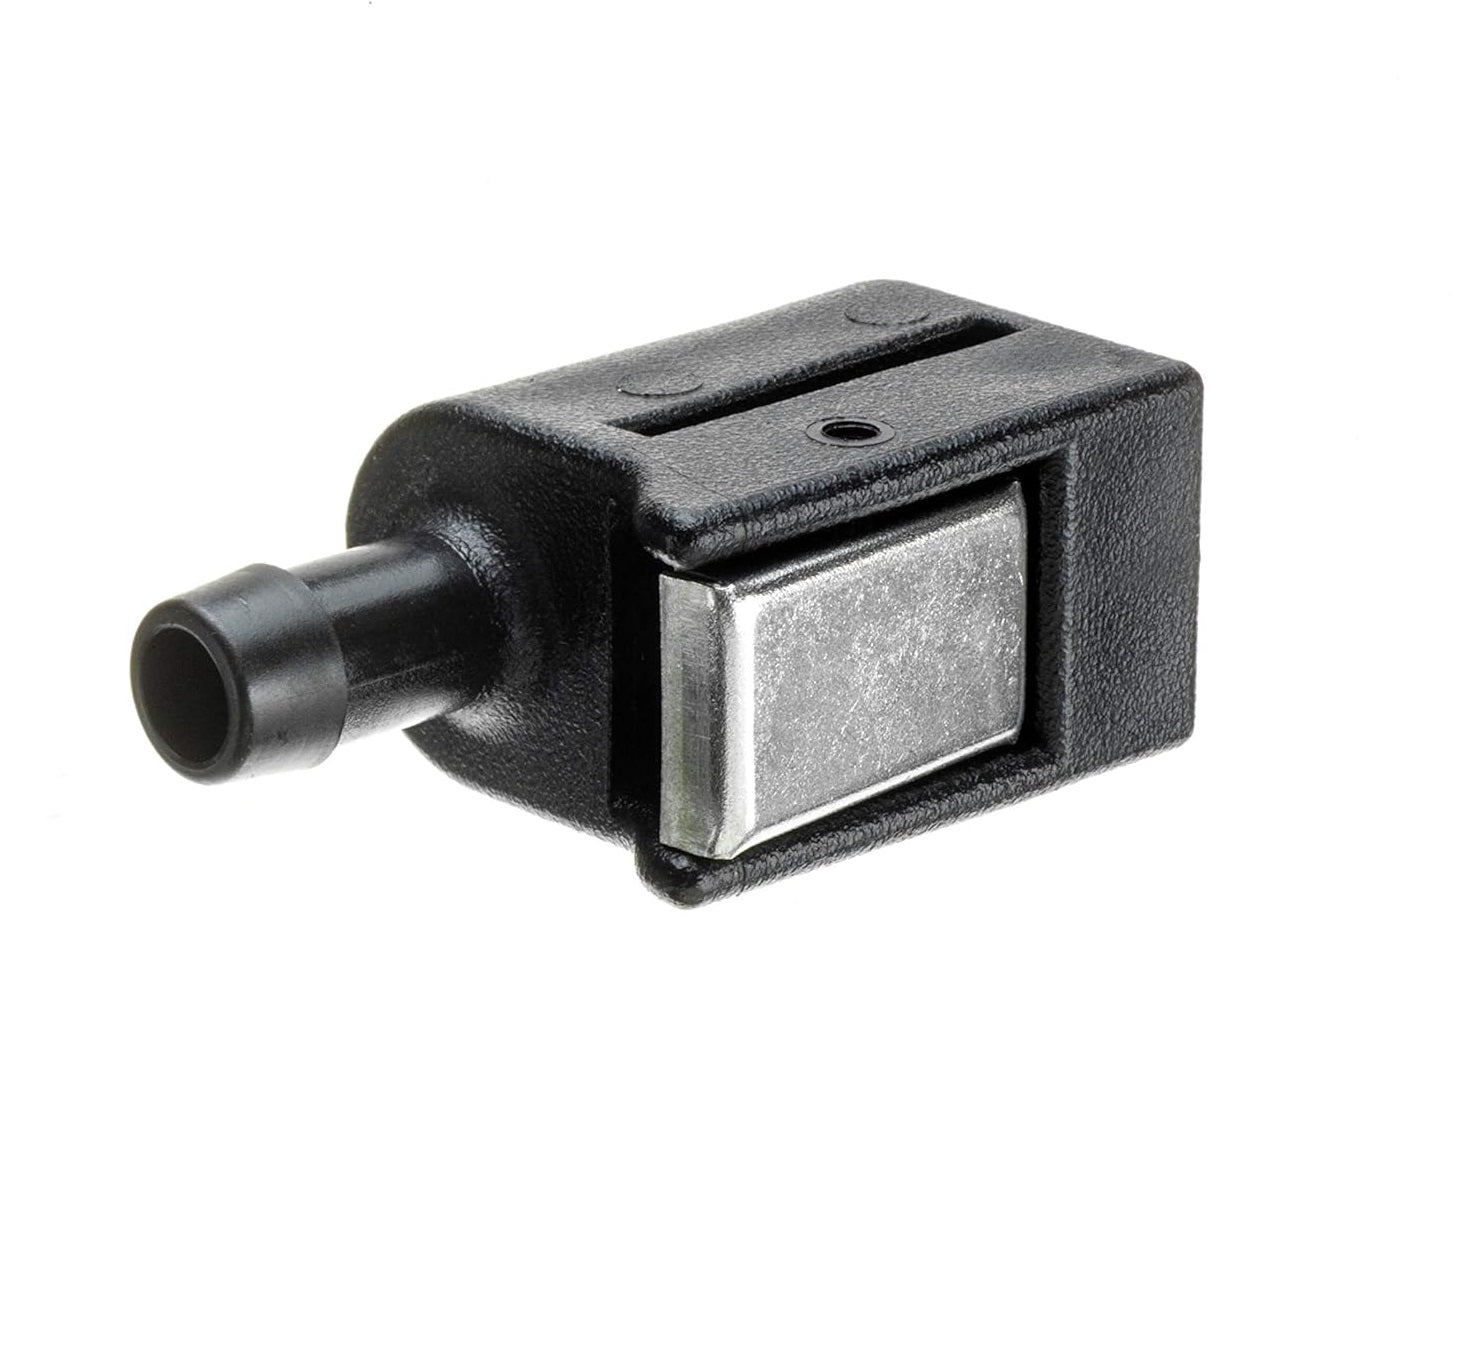 Mercury/Mariner/Mercruiser 22-13563Q3 22-13563A3 Fuel Line Connector 5/16" 4HP-40HP Outboard Motor 8mm Female